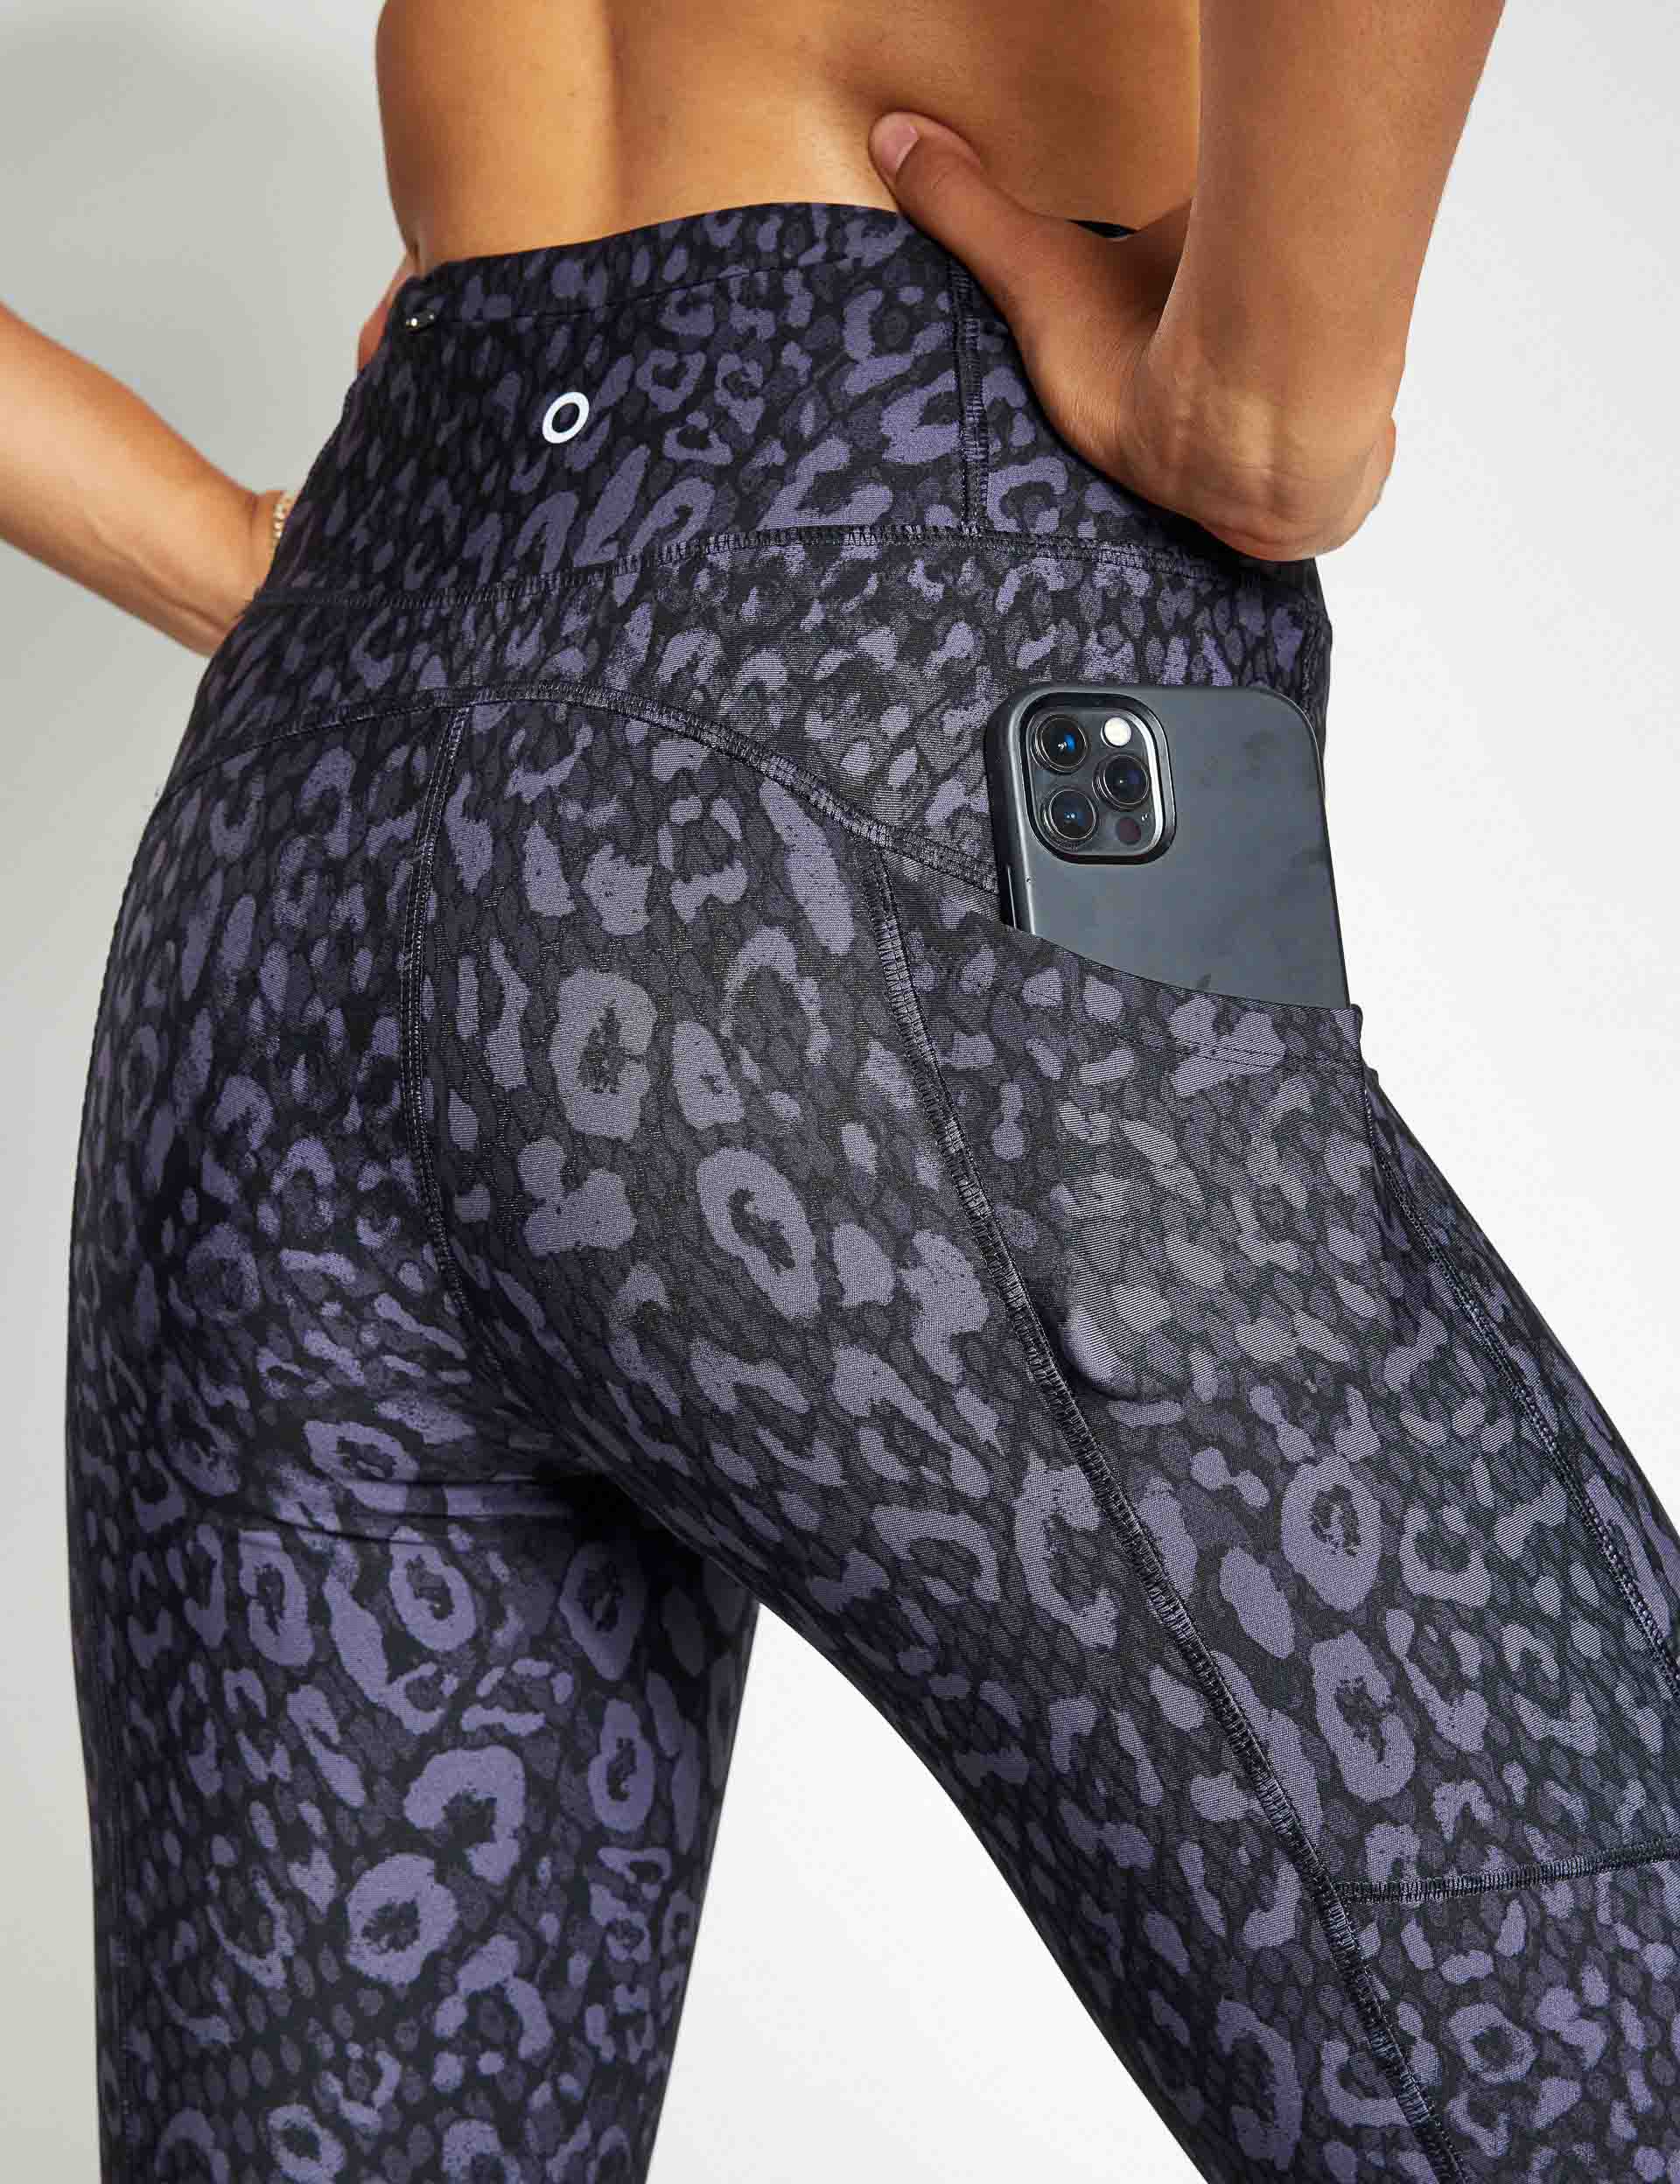 M&S GOODMOVE Go Move Printed High Waisted Gym Leggings 14 Lilac - Compare  Prices & Where To Buy 